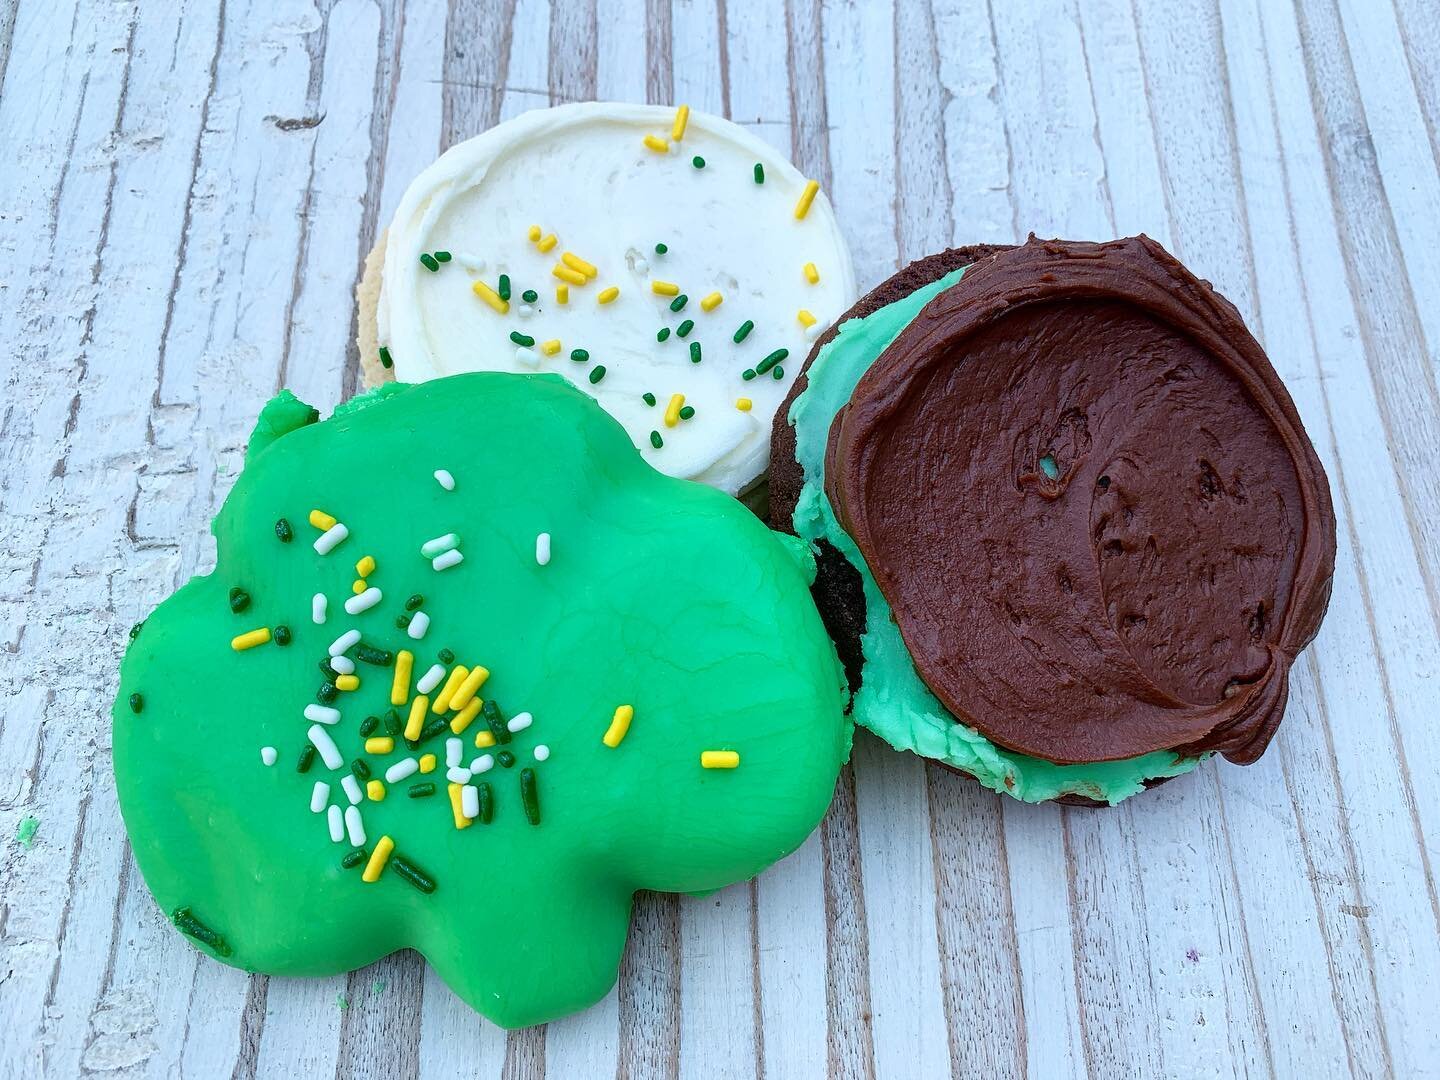 🇮🇪Happy St. Patrick&rsquo;s Day☘️
.
If you&rsquo;re not wearing green today then you better come swipe one of these delicious green / St. Patrick&rsquo;s Day cookies! 
Don&rsquo;t wanna get pinched 😉
_
We also carry some freshly baked Rye and Marb